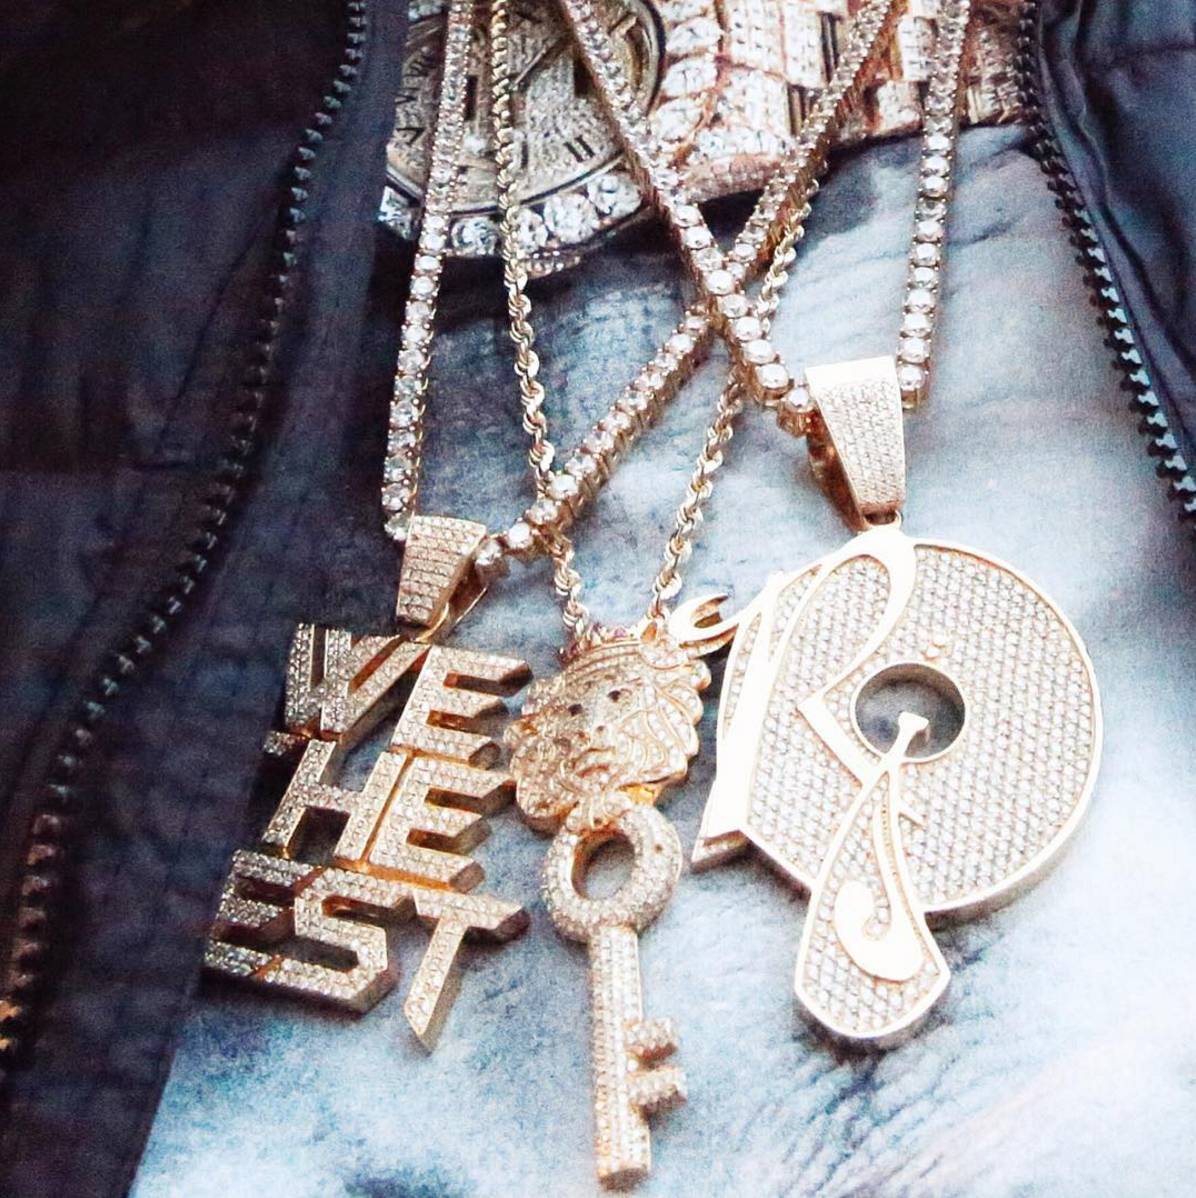 DJ Khaled Blinds Us With His Bling - It all looks so heavy and so, so shiny.(Photo: DJ Khaled via Instagram)